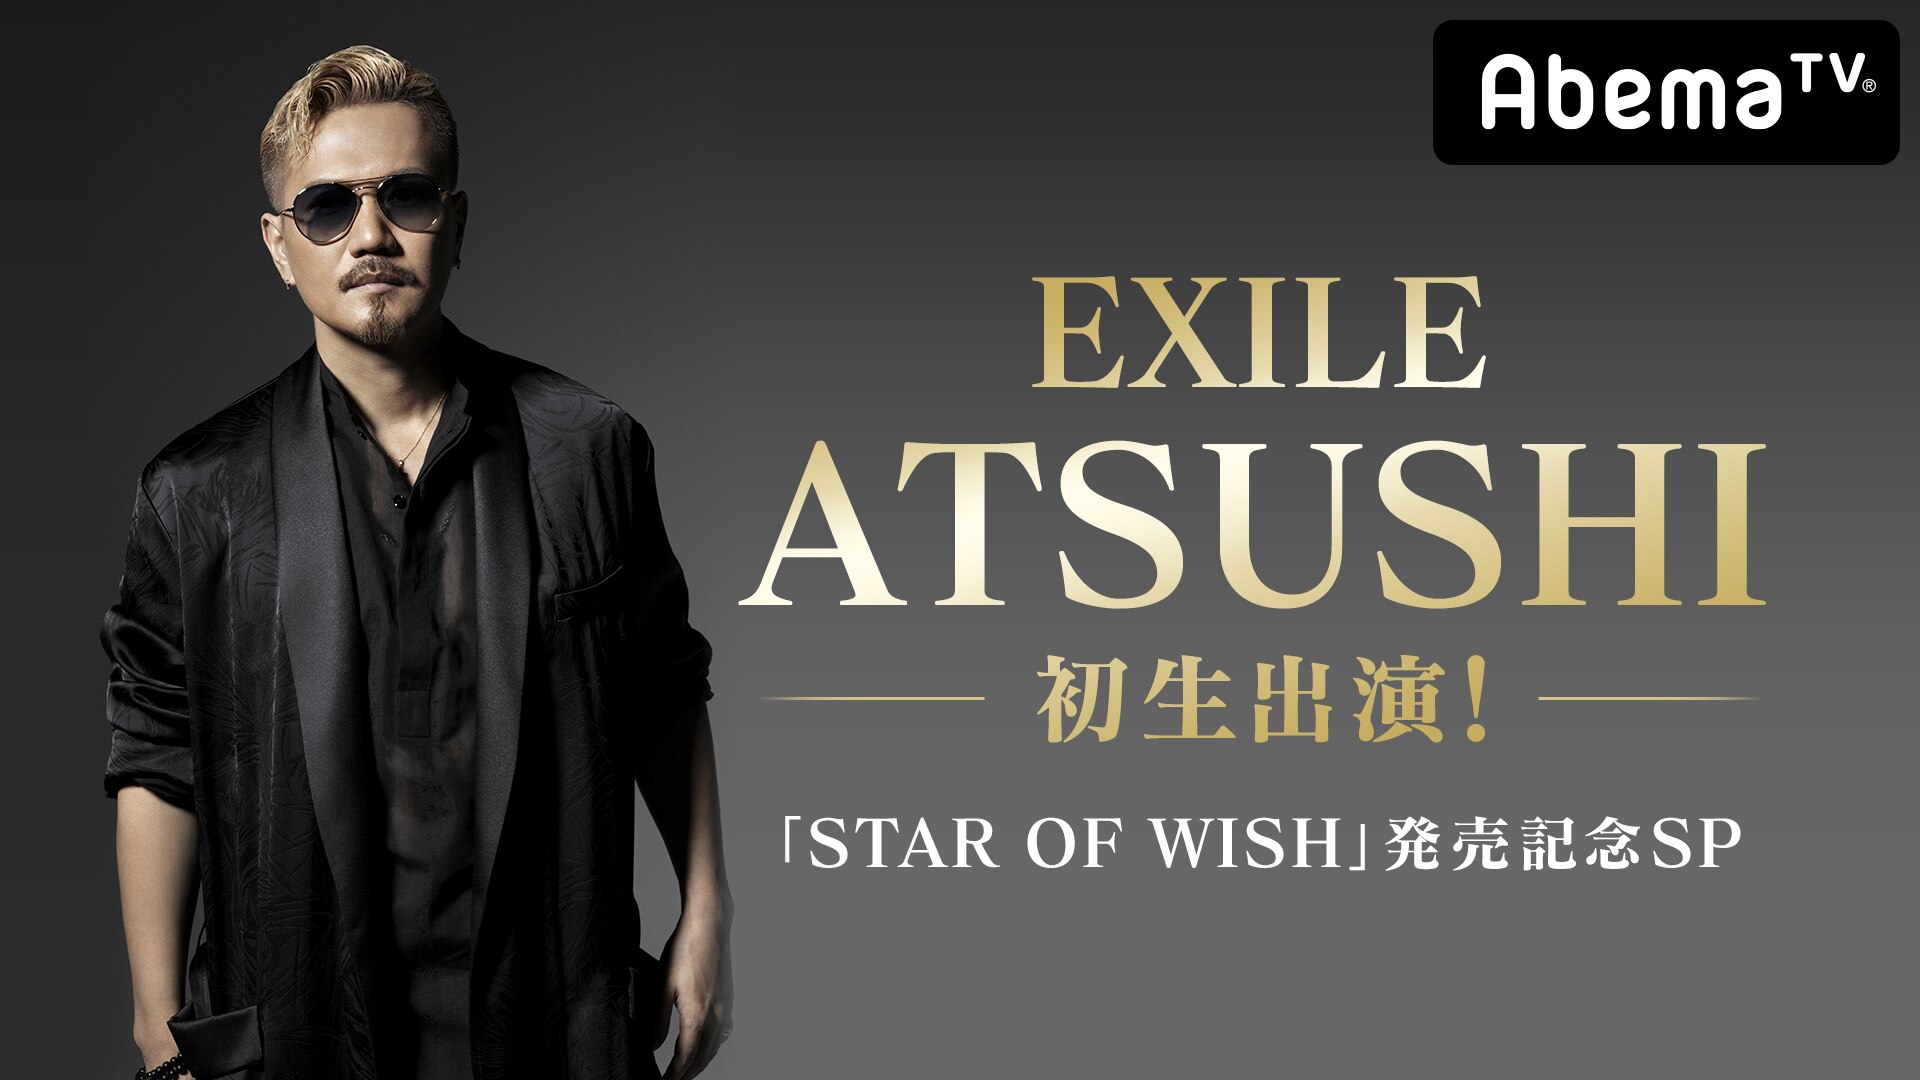 Schedule Exile Atsushi初生出演 Star Of Wish 発売記念sp Exile Official Website